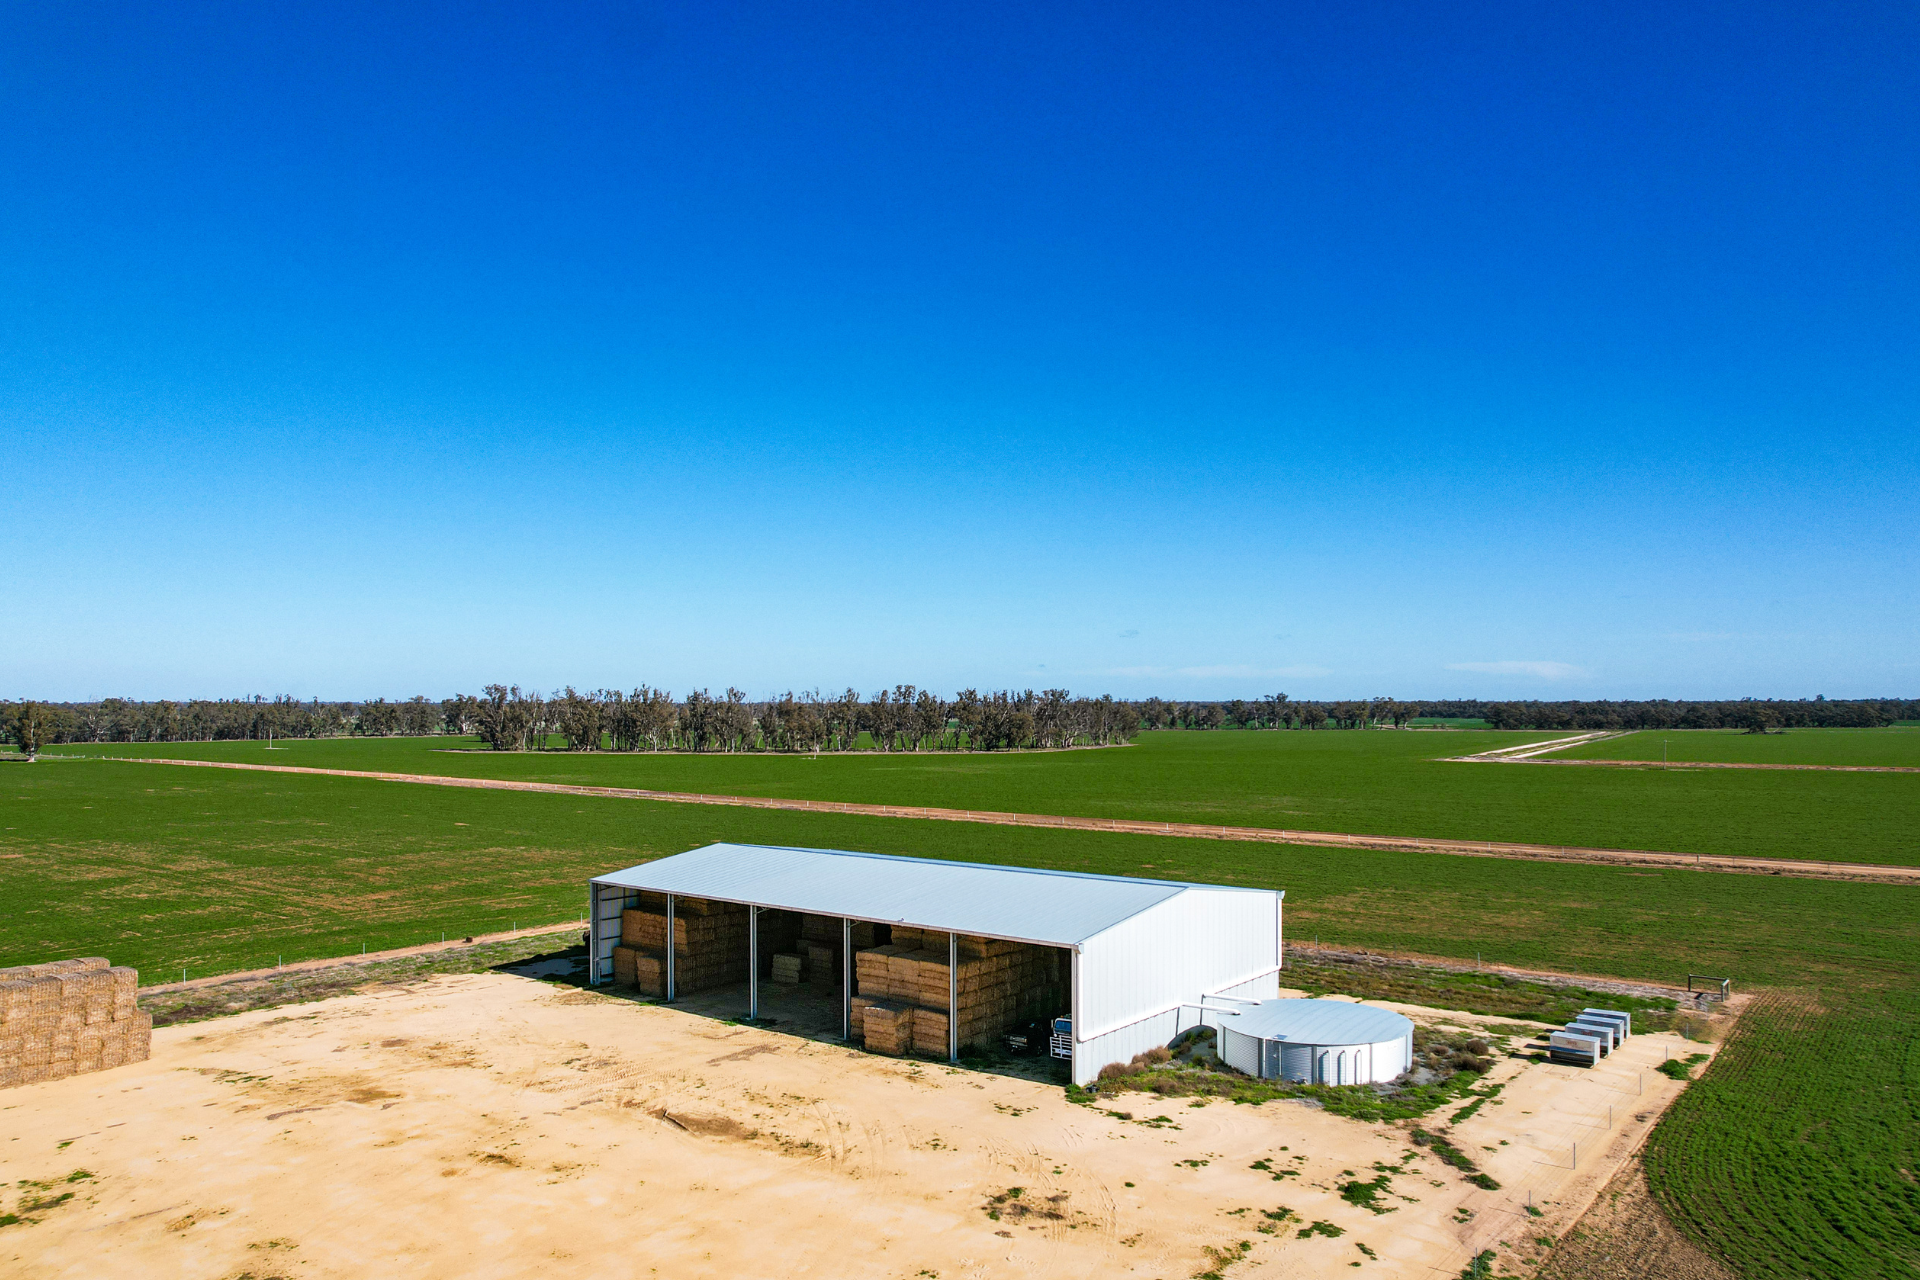 A 41.25m x 24m x 7.5m hay shed at Womboota NSW